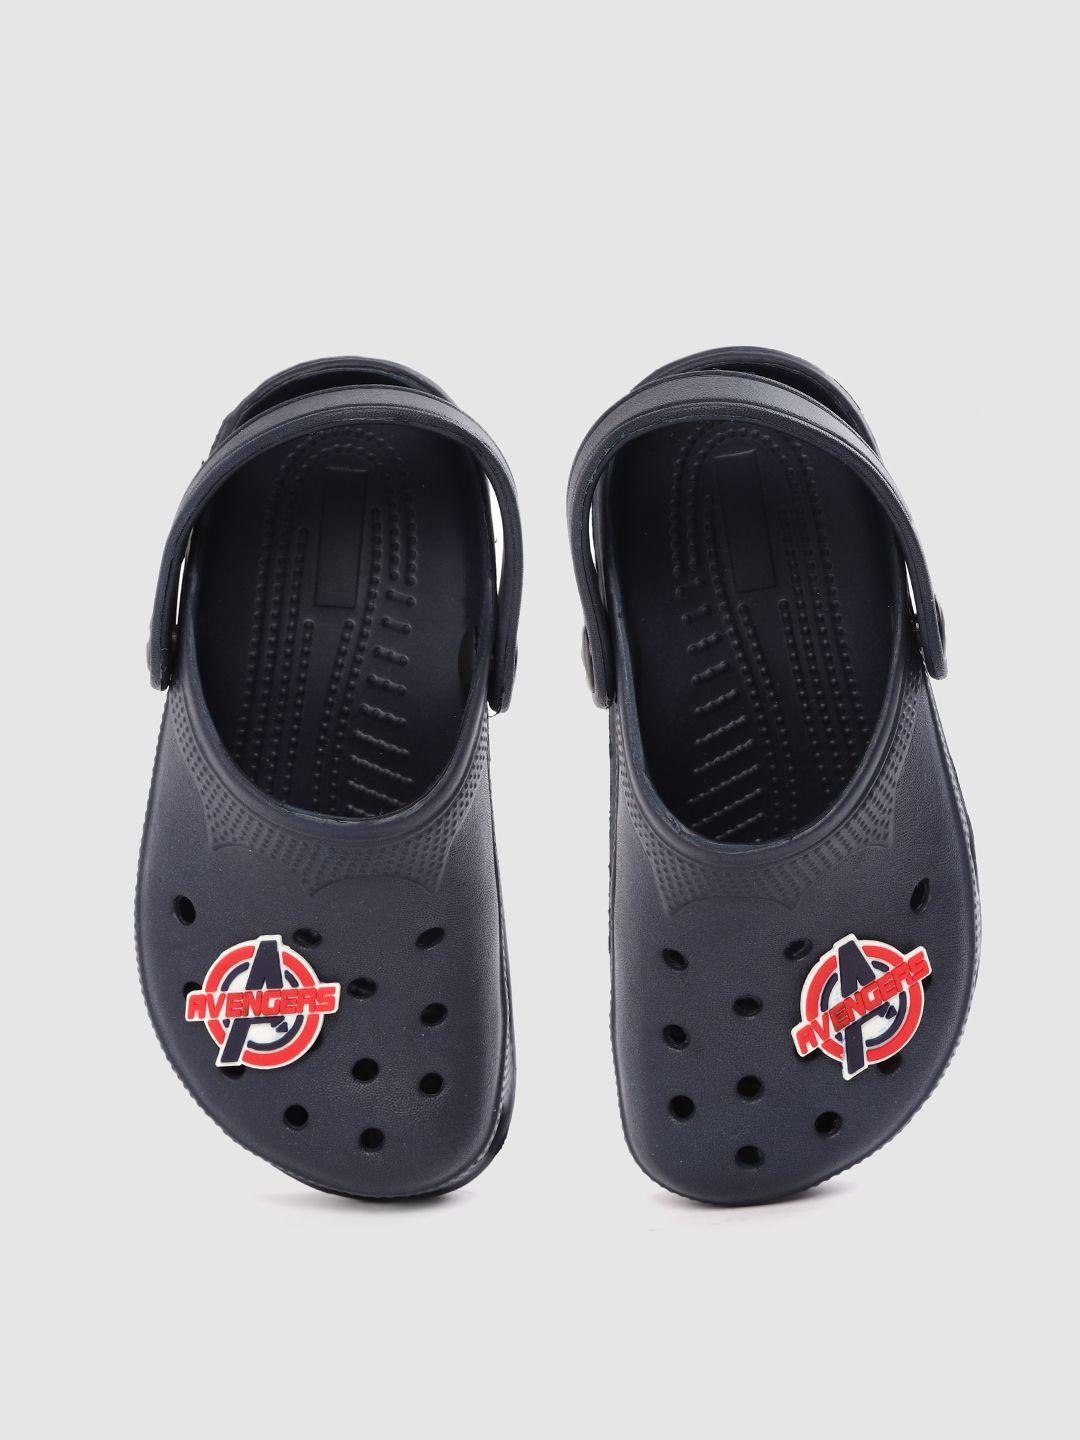 toothless-boys-navy-blue-avengers-printed-rubber-clogs